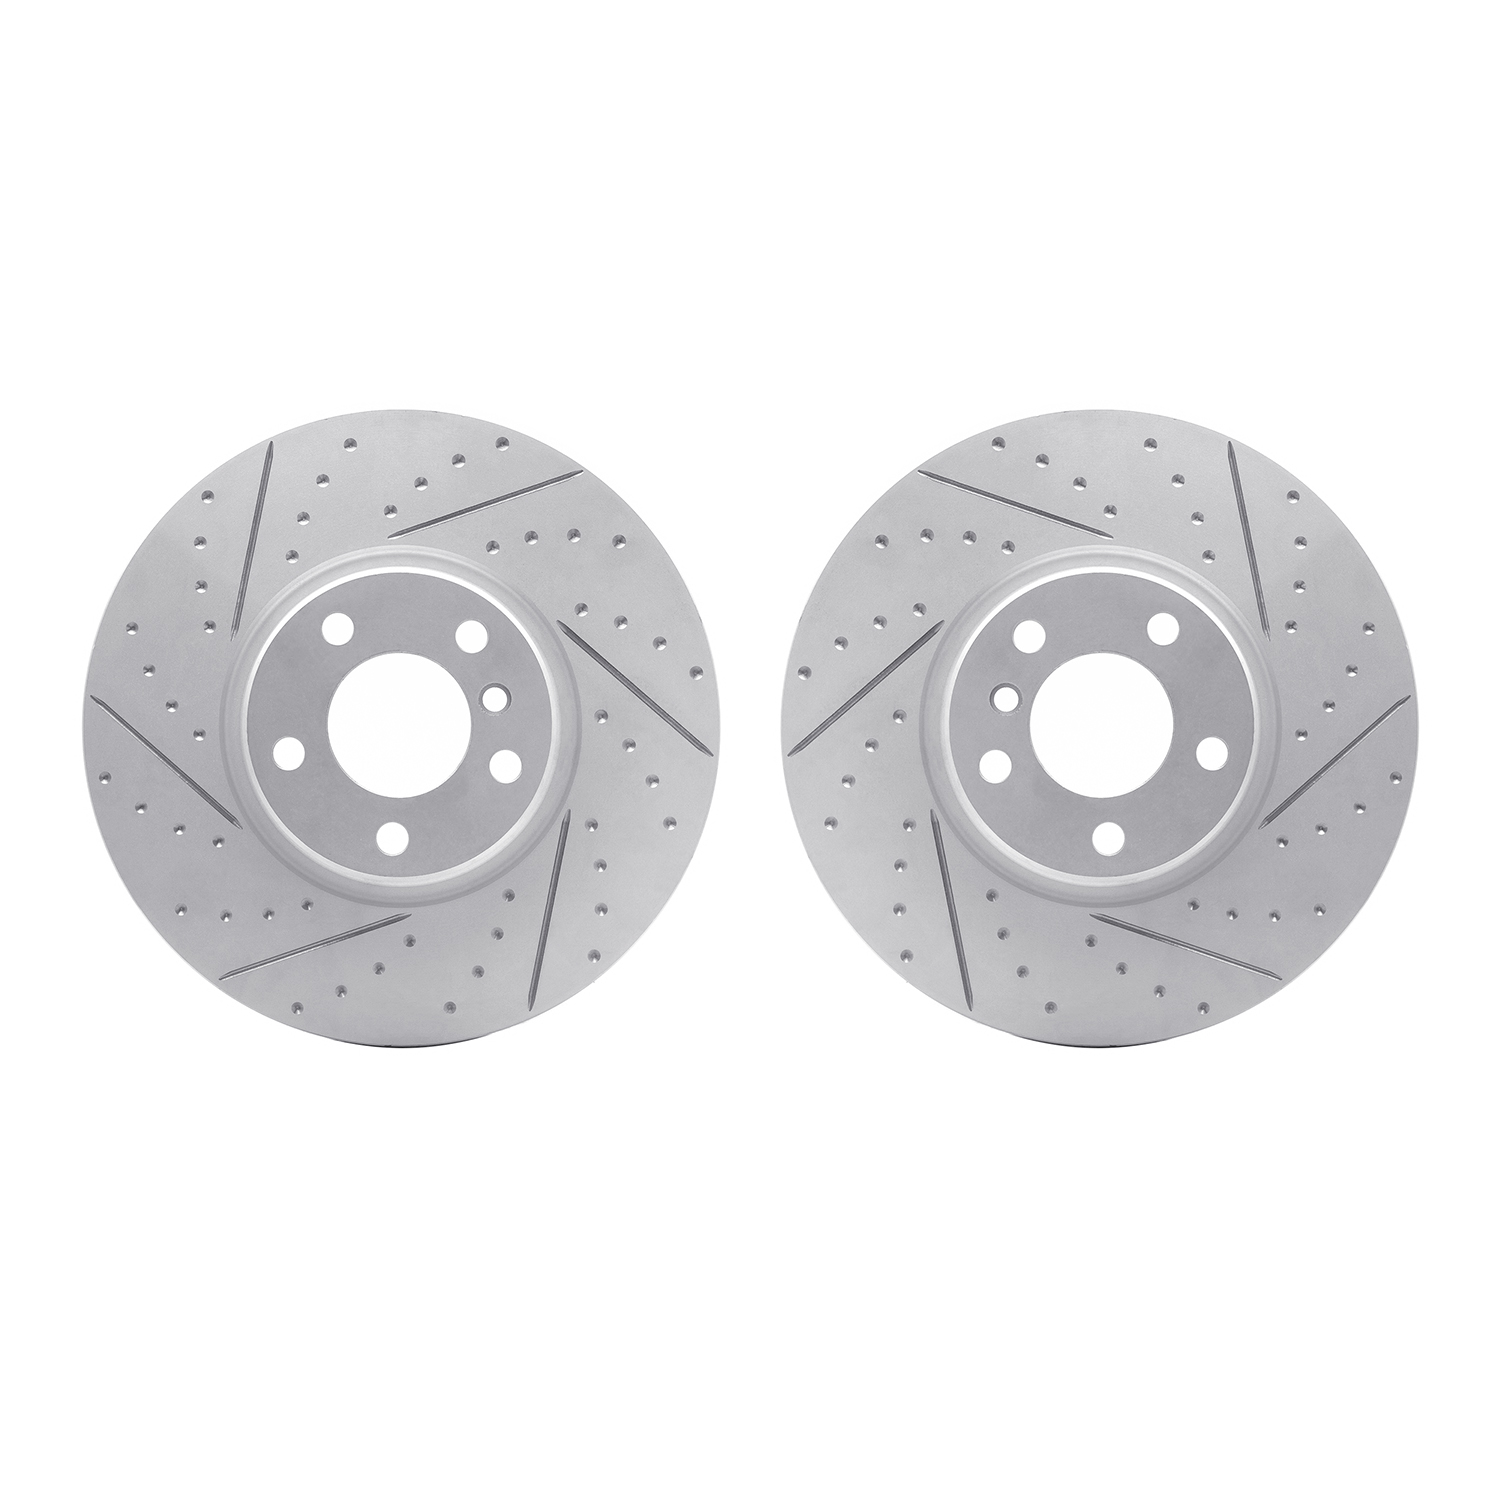 2002-31042 Geoperformance Drilled/Slotted Brake Rotors, 2016-2018 BMW, Position: Front